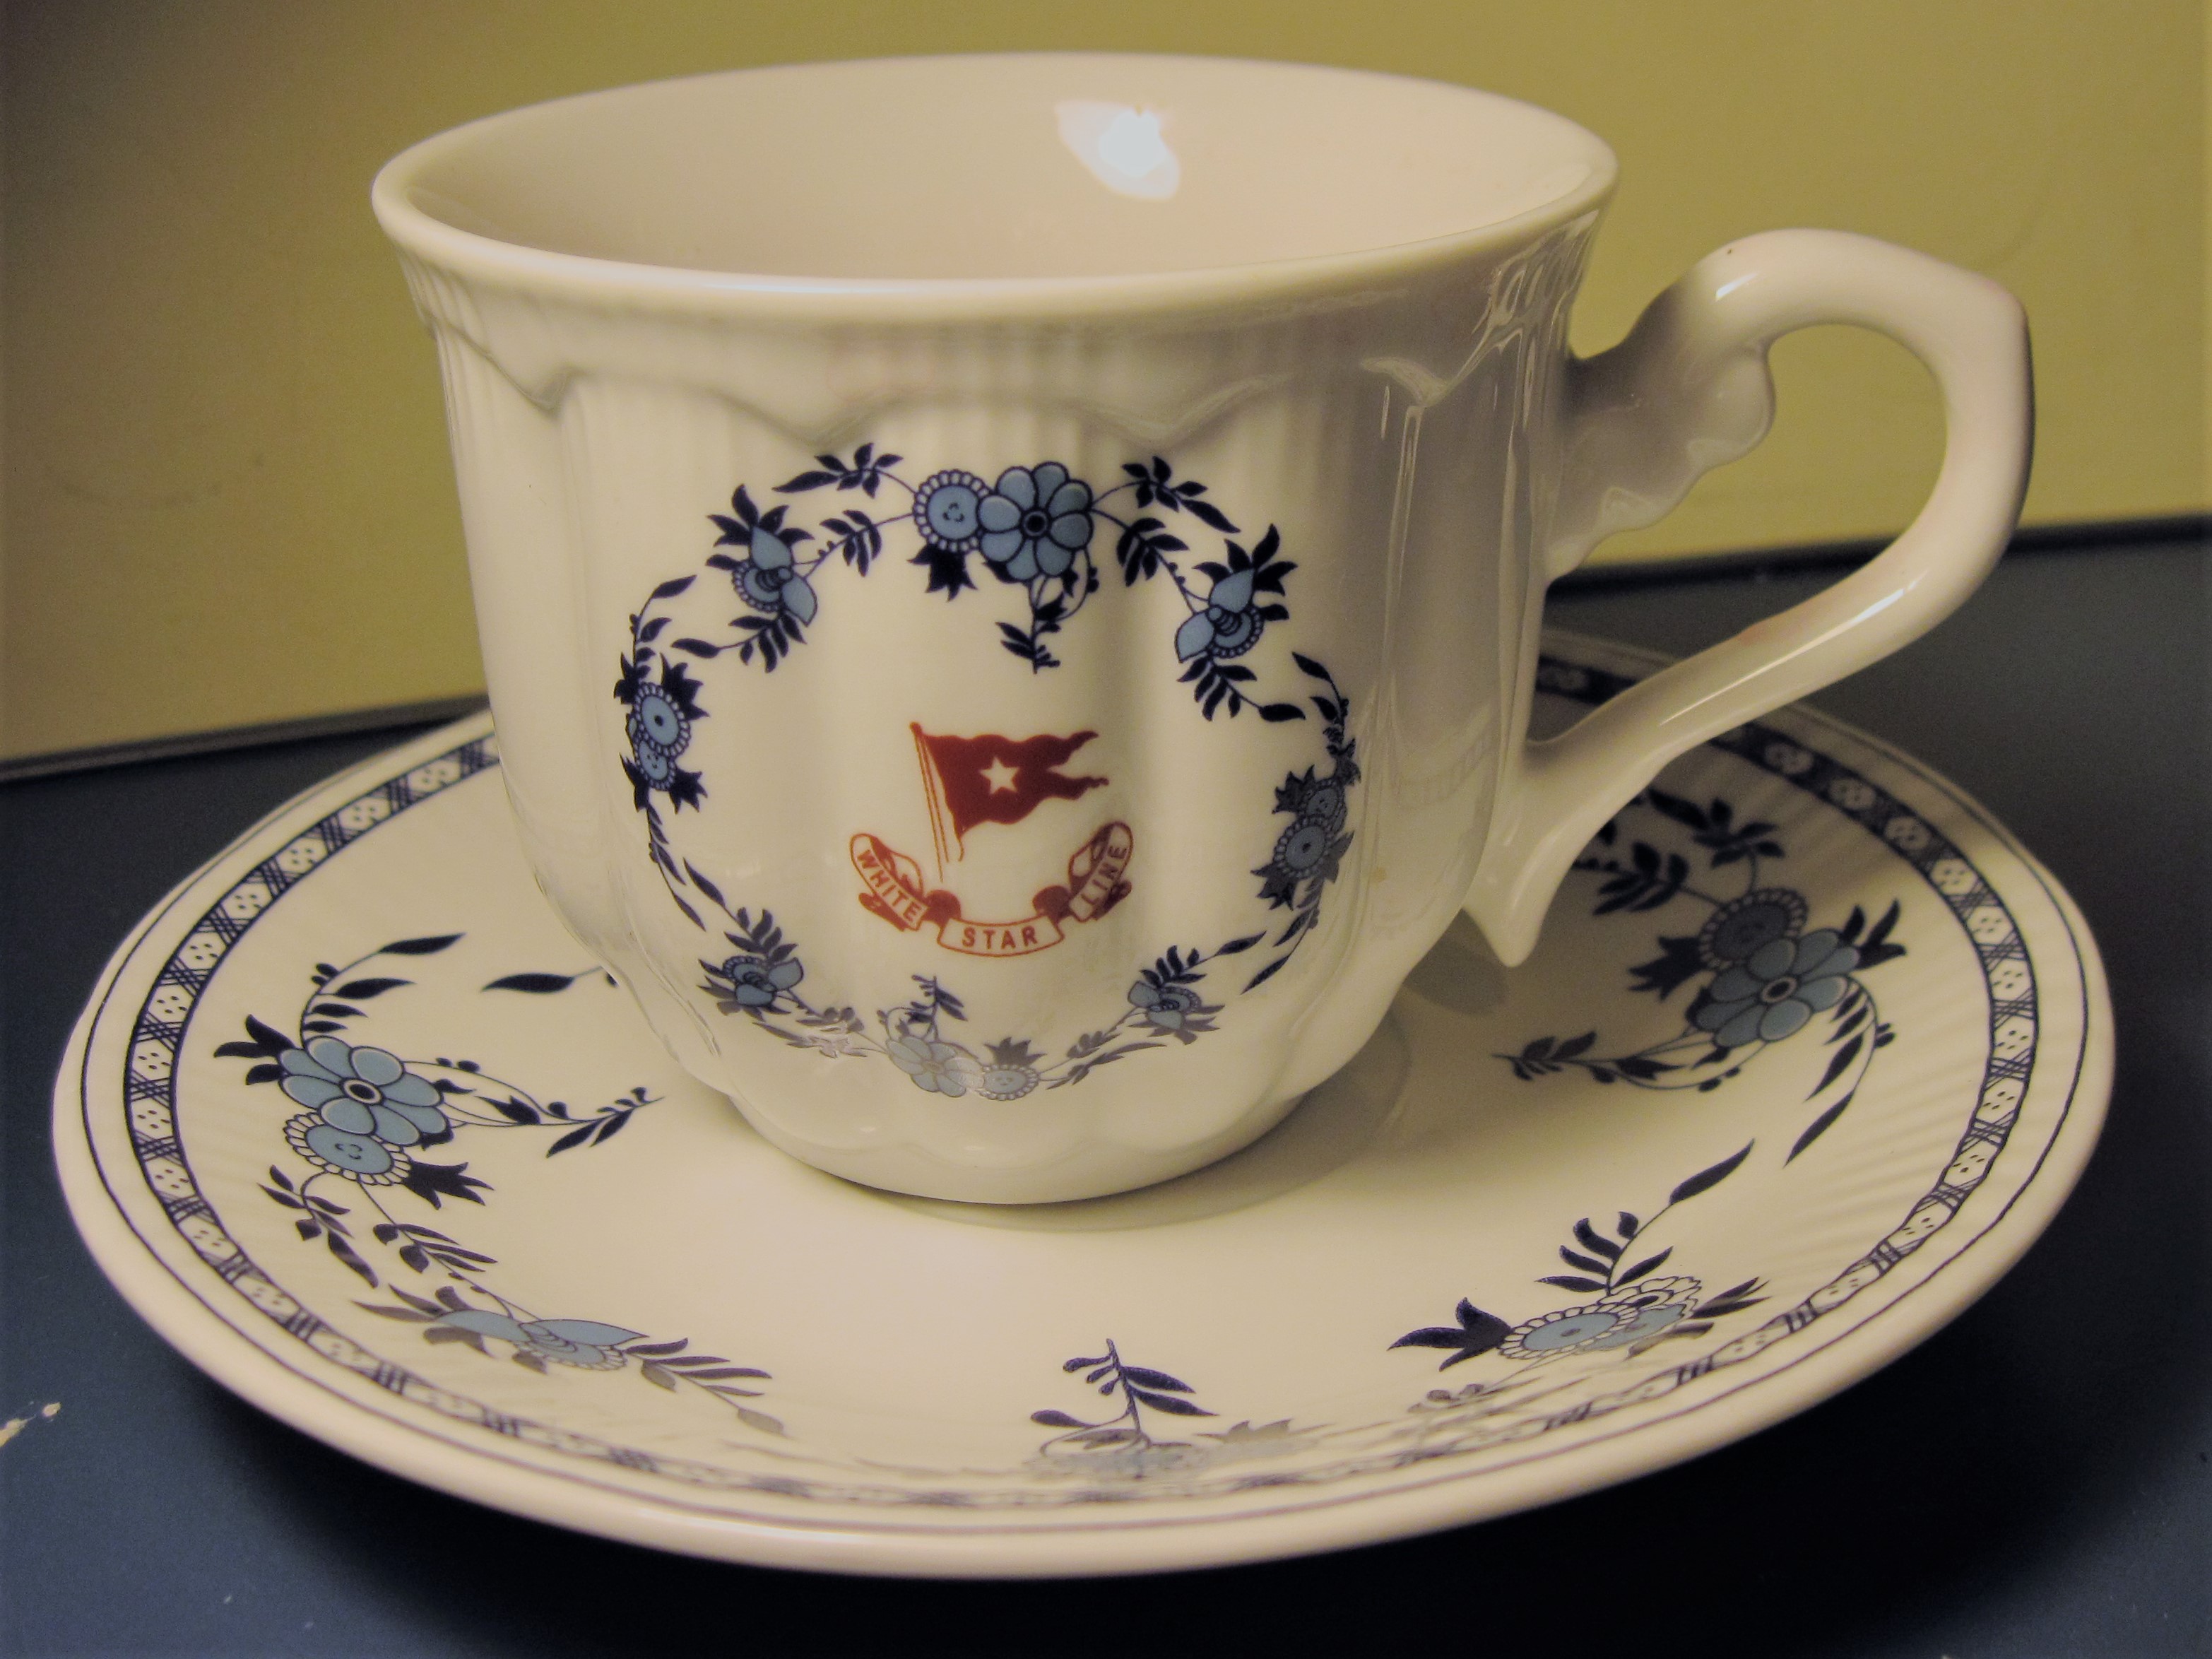 Titanic cup and saucer